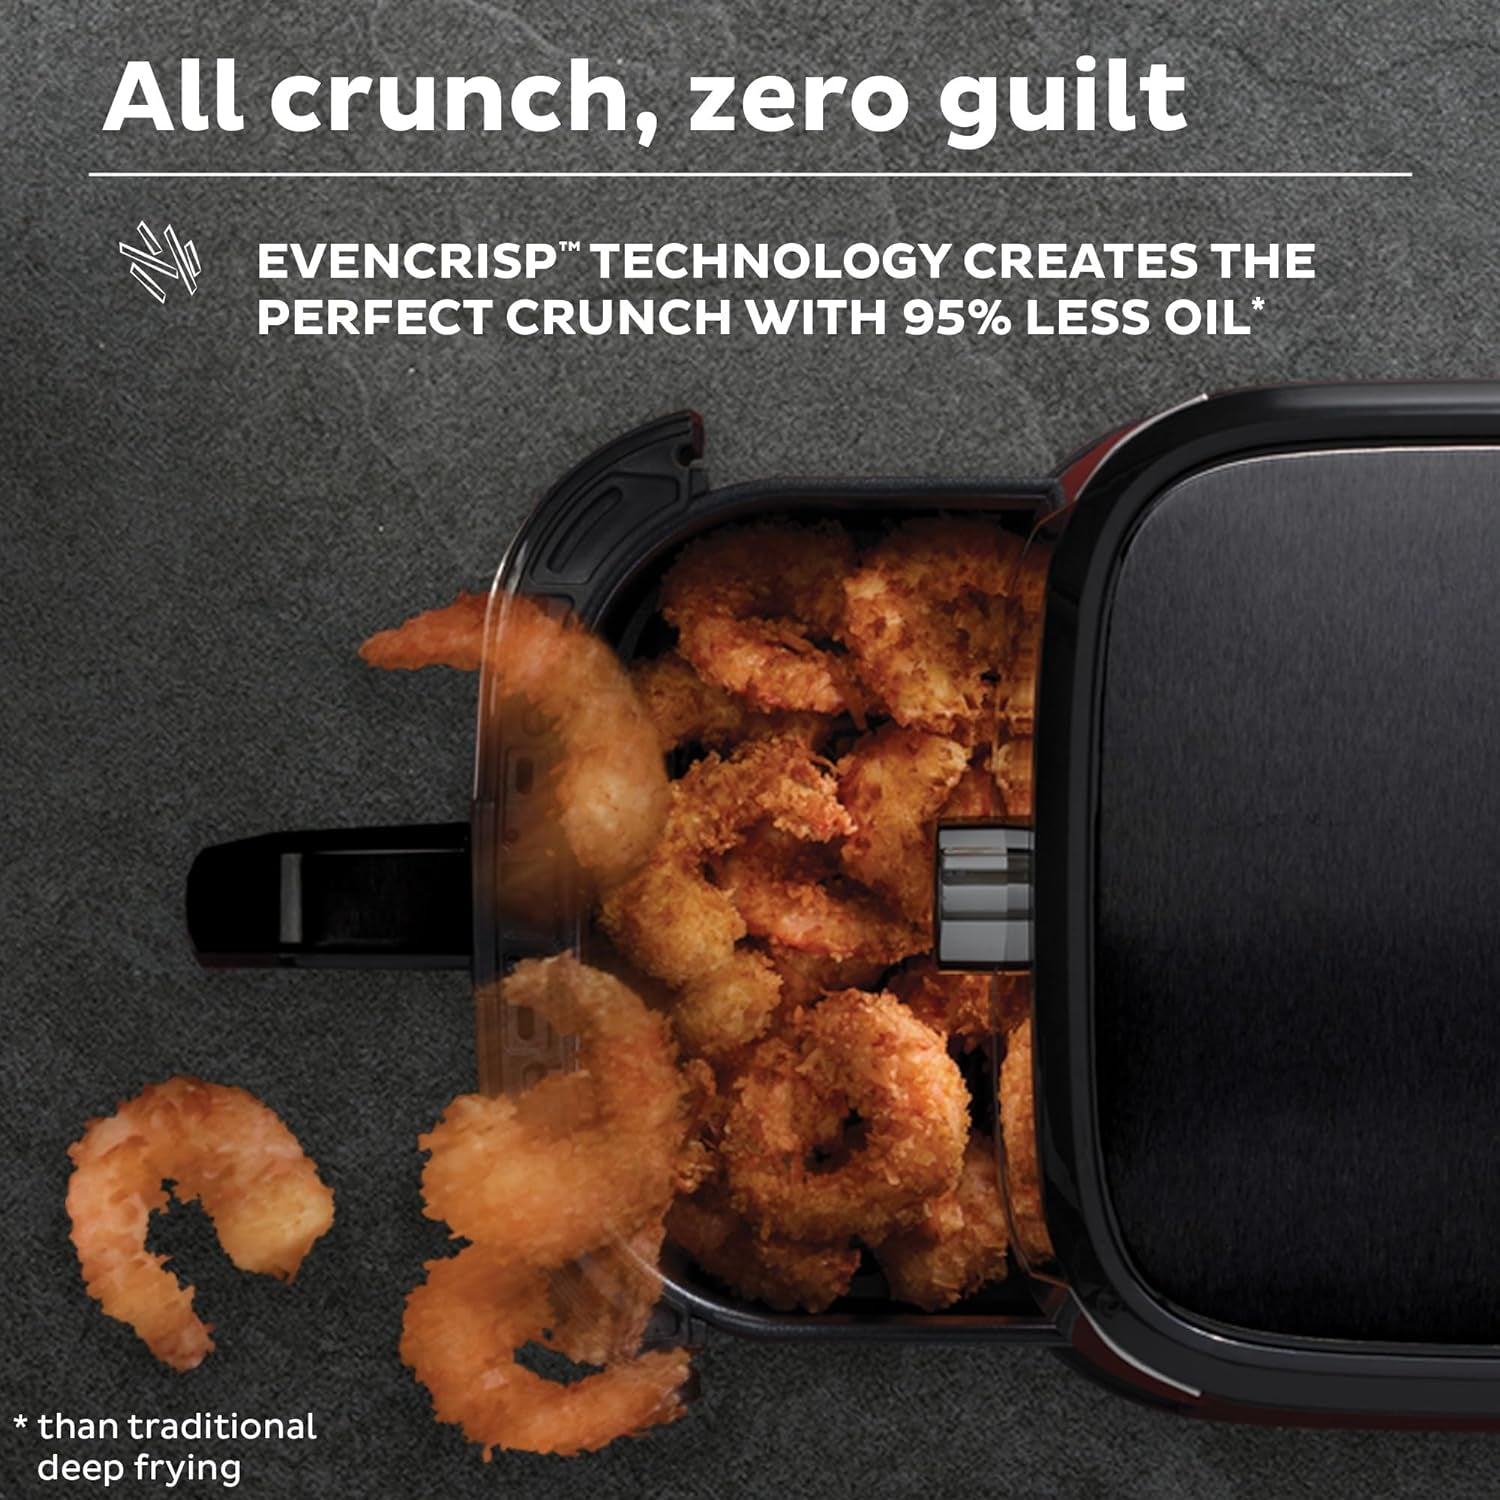 Instant Vortex 6QT XL Air Fryer, 4-In-1 Functions That Crisps, Roasts, Reheats, Bakes for Quick Easy Meals, 100+ In-App Recipes, Is Dishwasher-Safe, from the Makers of , Black